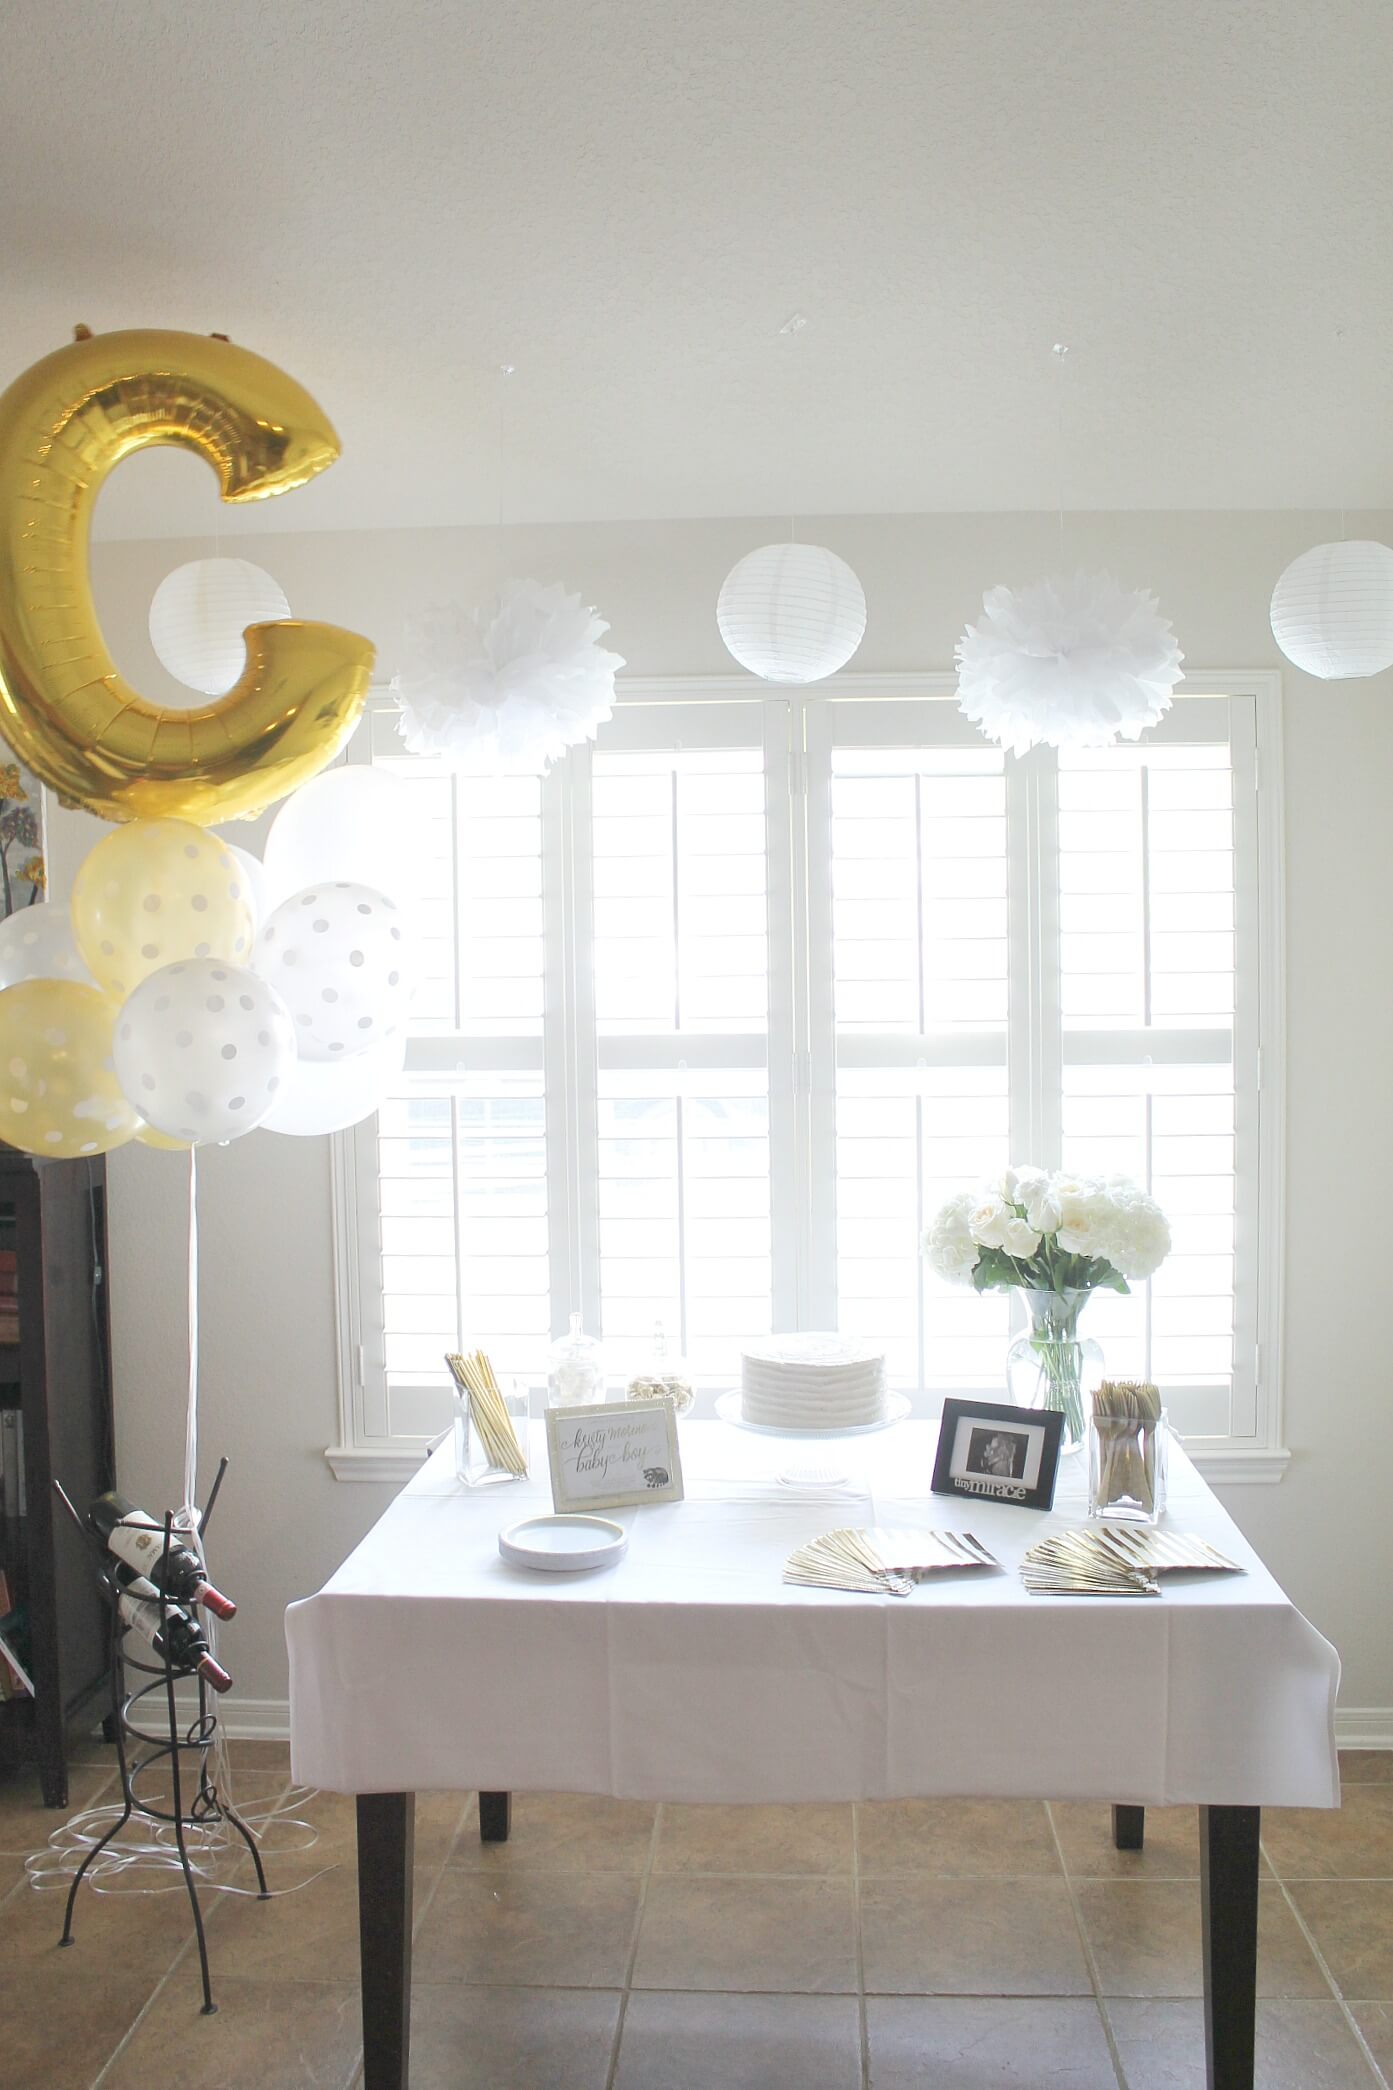 A gender neutral baby shower sprinkle. All the details from an elegant and simple shower in a color scheme of white, gray, and gold.